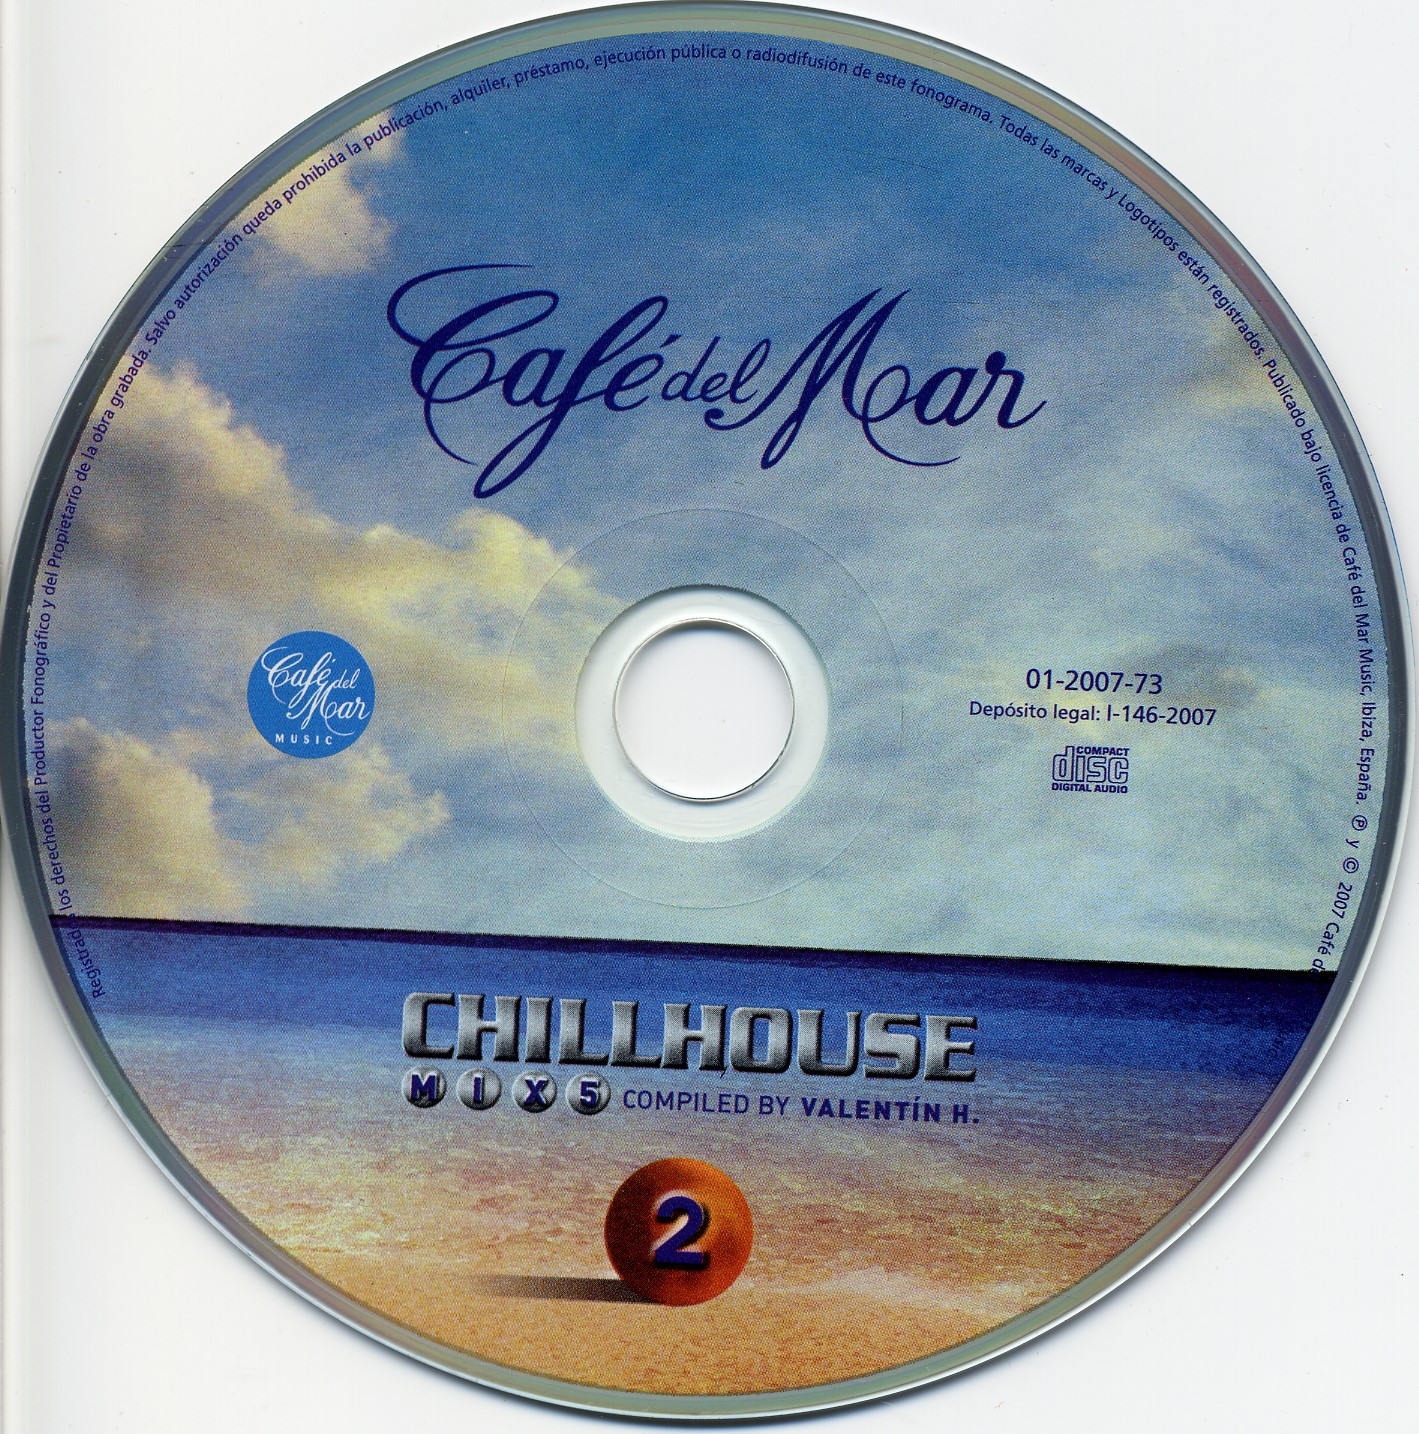 COVERS.BOX.SK ::: VA - Cafe Del Mar Chillhouse Mix 5 (Compiled By ...